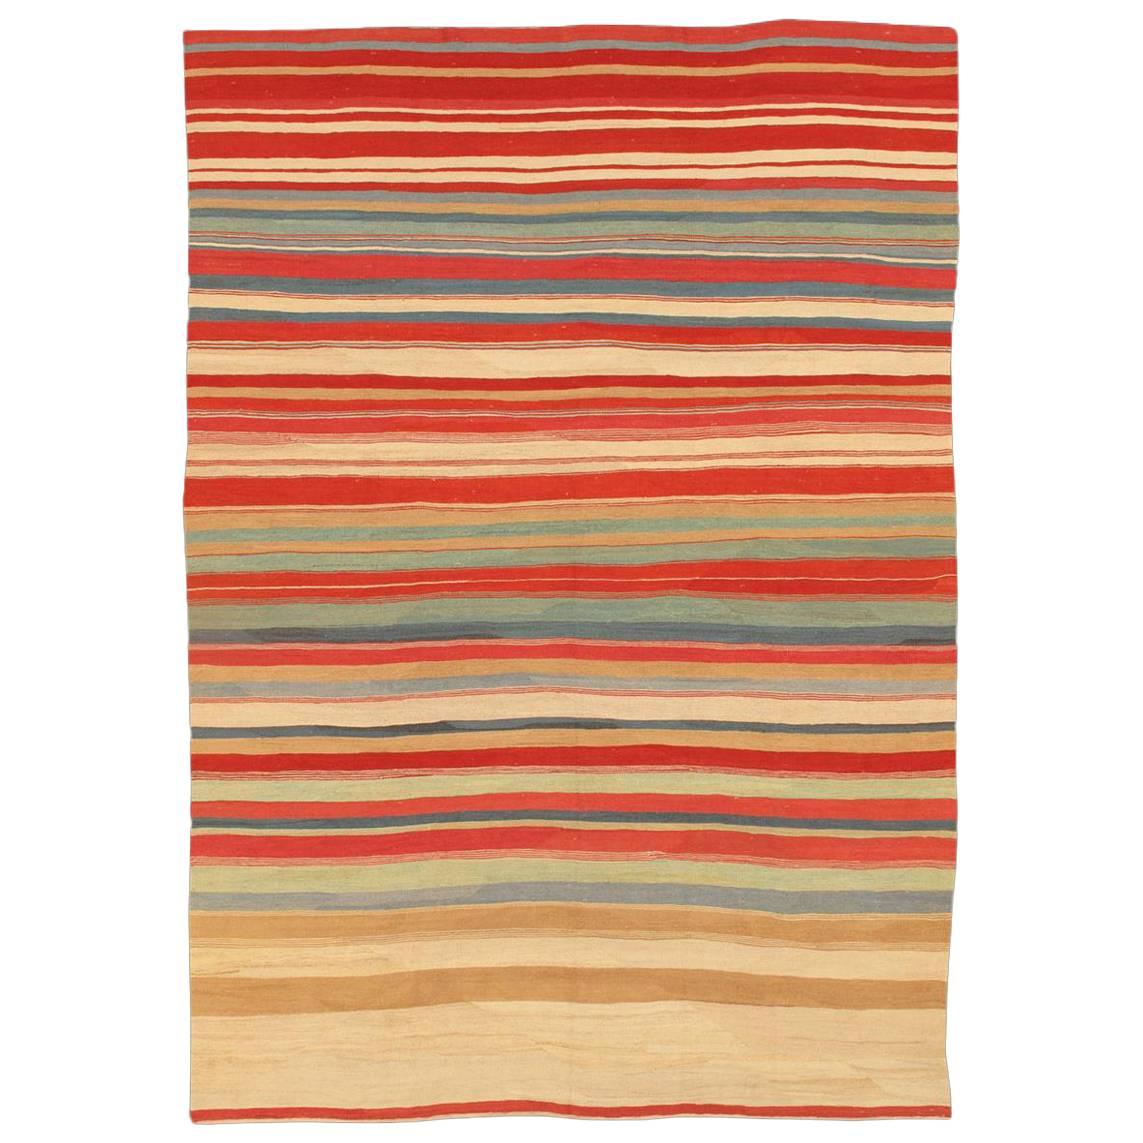 Lovely Multicolored Striped Modern Kilim Rug, 7.09x11 For Sale